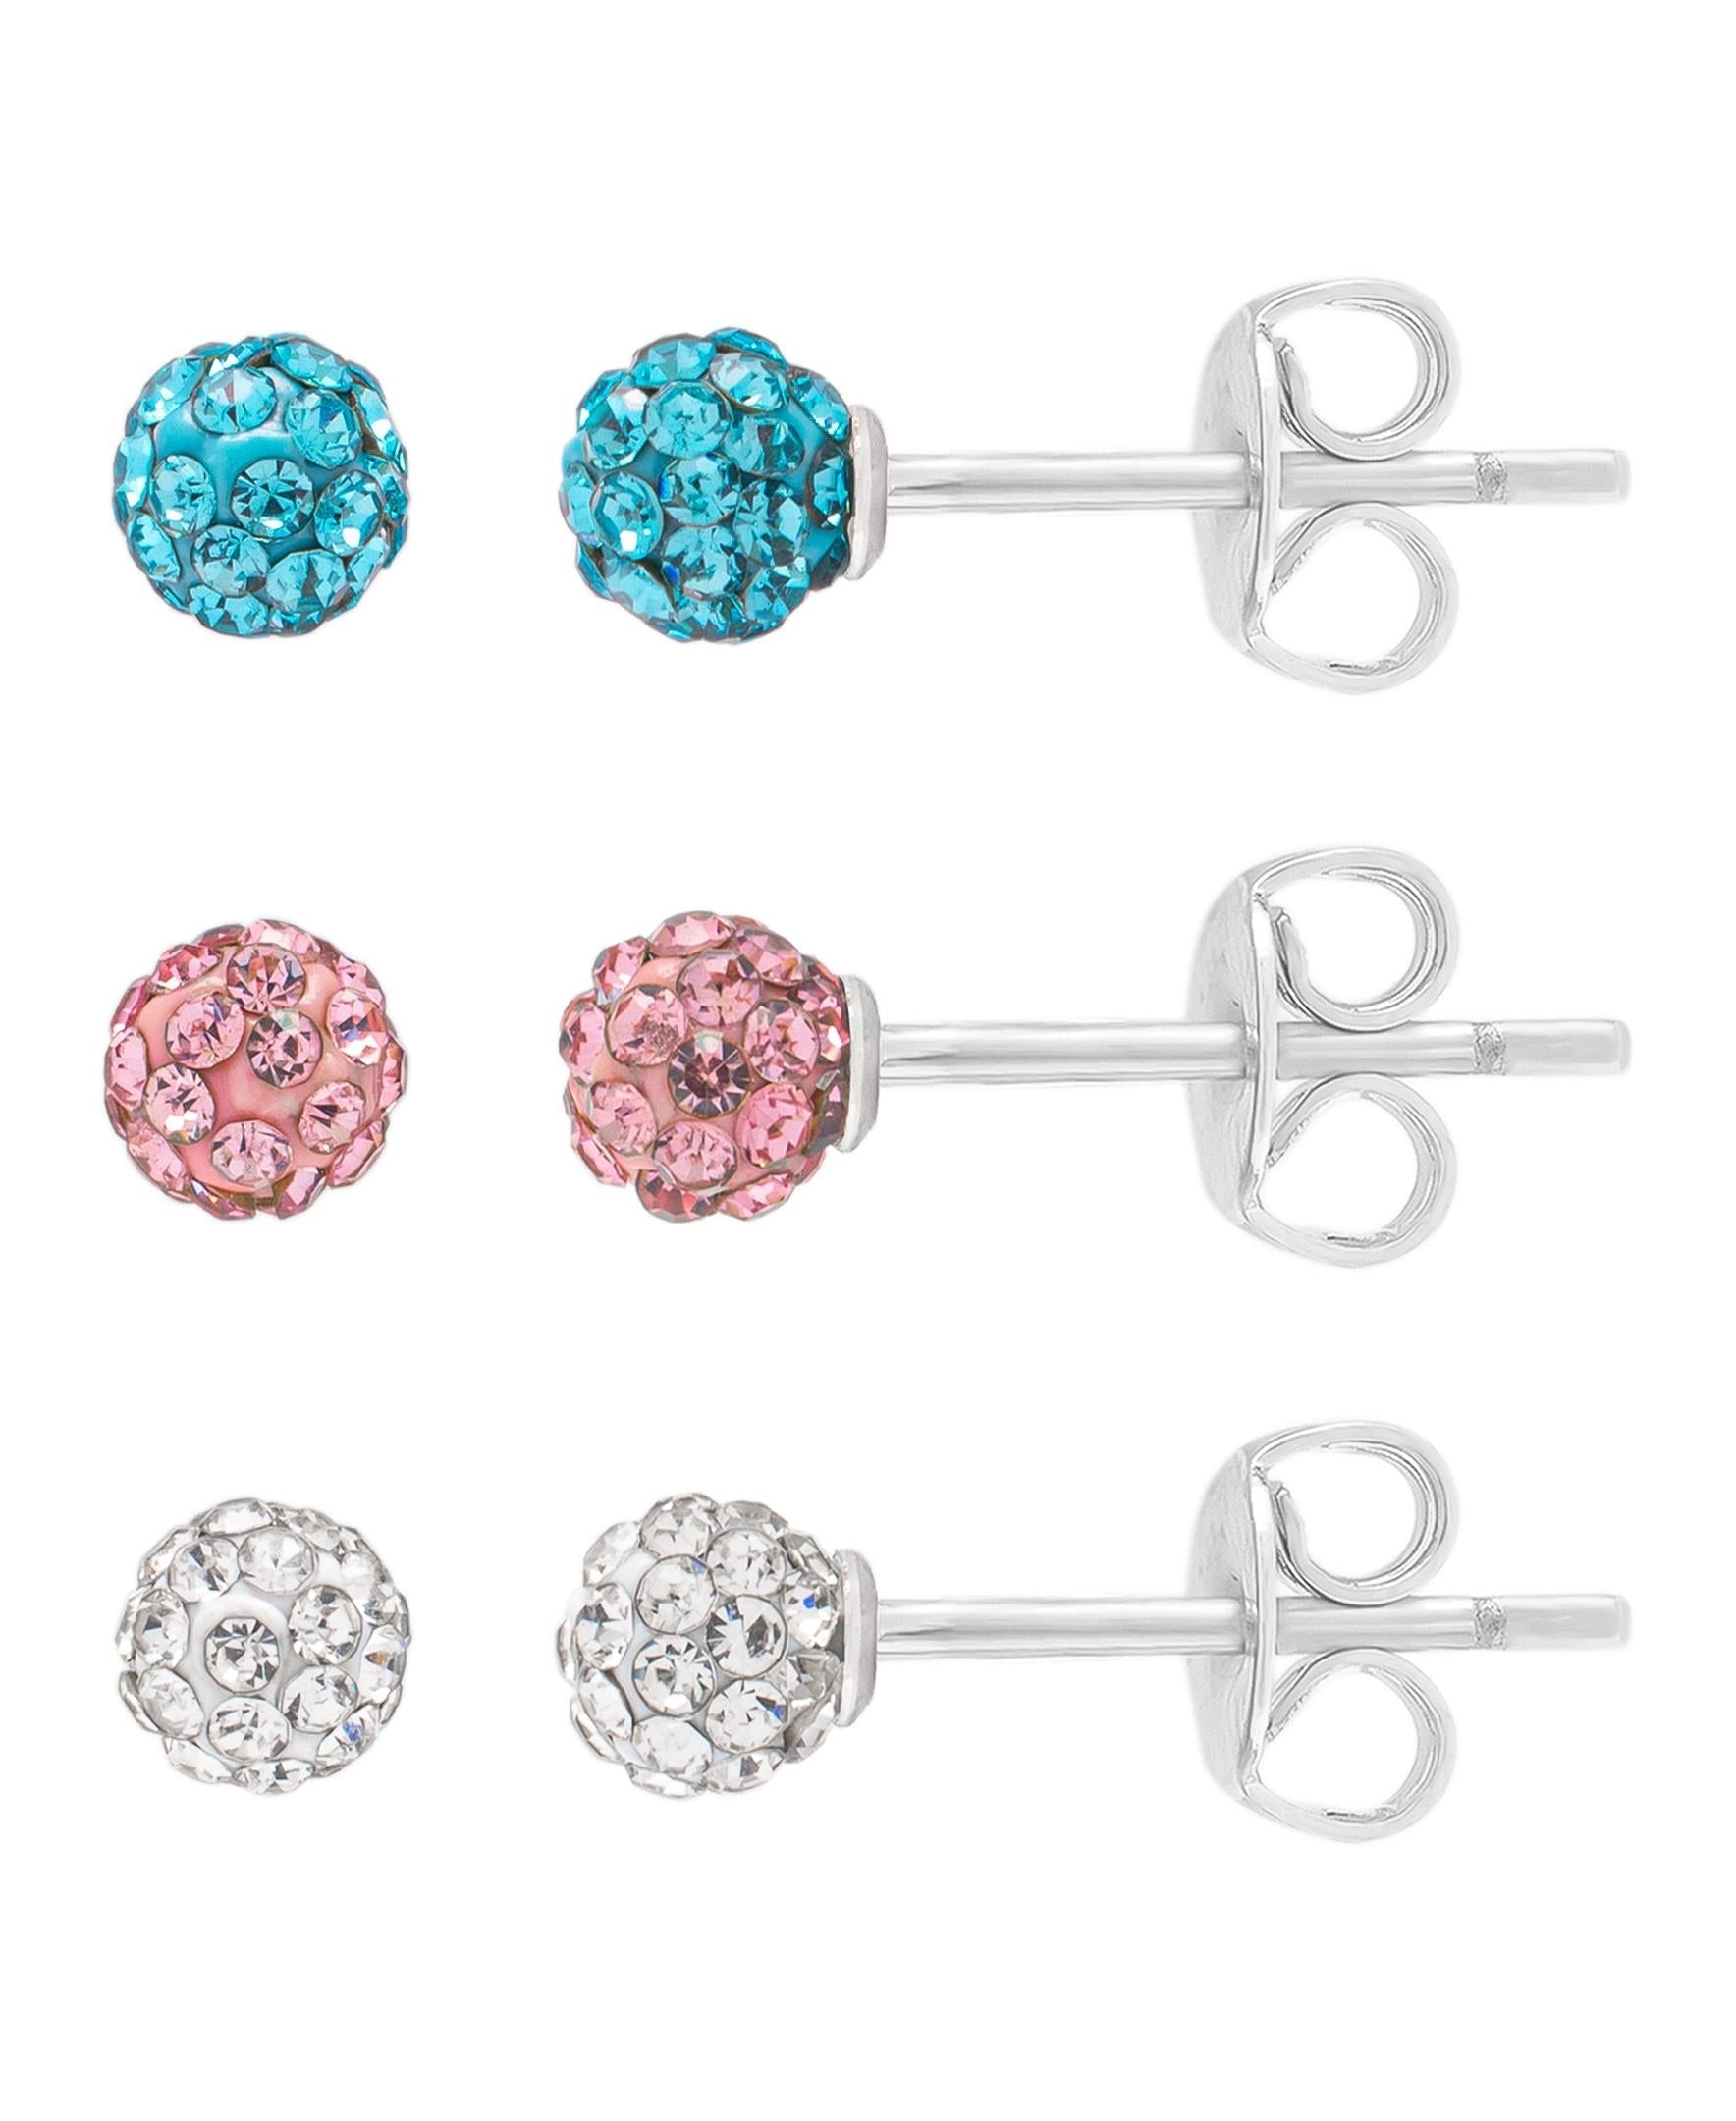 Silver Plated Crystal Ball 3PC Stud Set Earrings